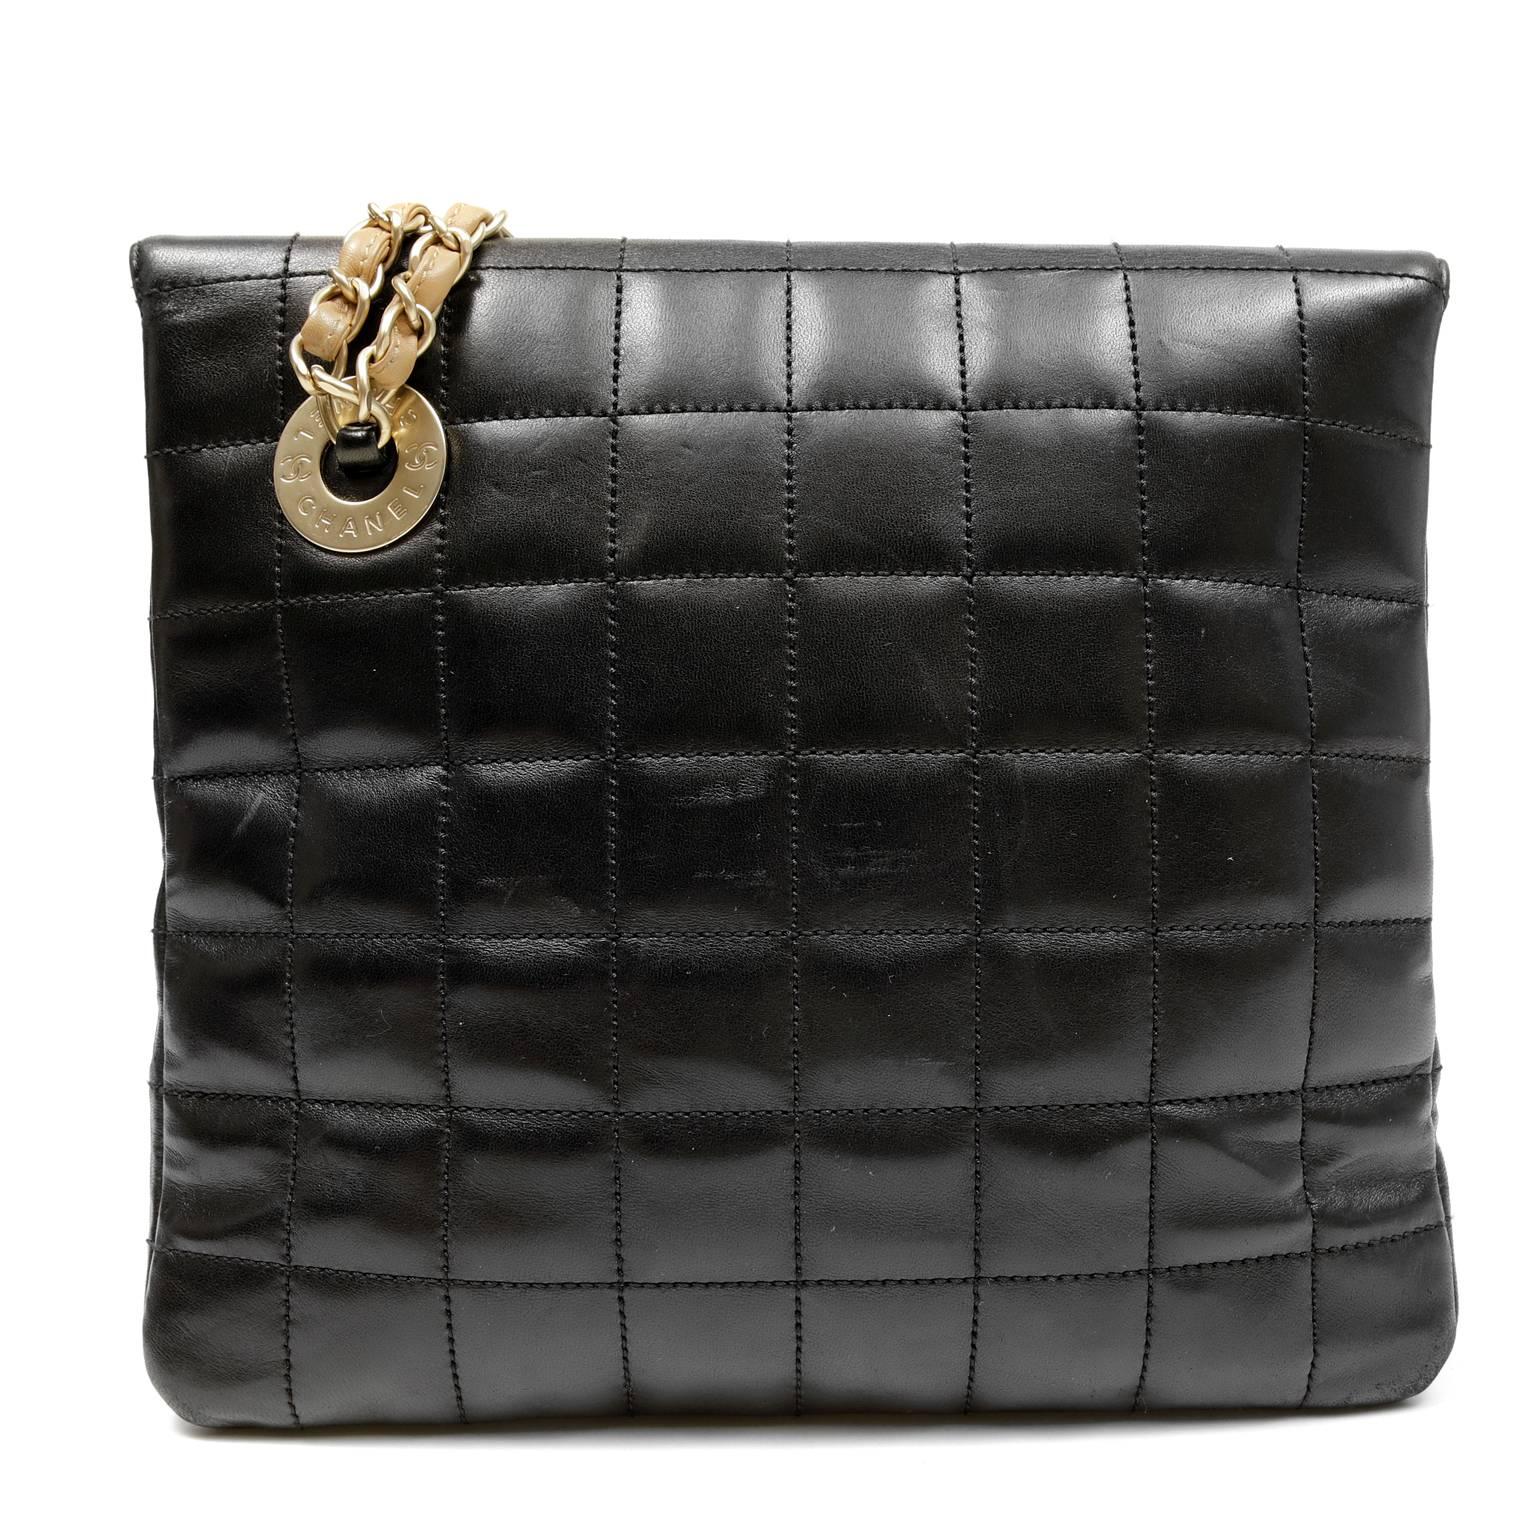 Chanel Black Leather Shoulder Bag- PRISTINE
 Designed with an off center mademoiselle twist lock and contrasting straps, this unique (yet totally wearable) Chanel is a must have for any collection.  

Black leather is quilted in chocolate square